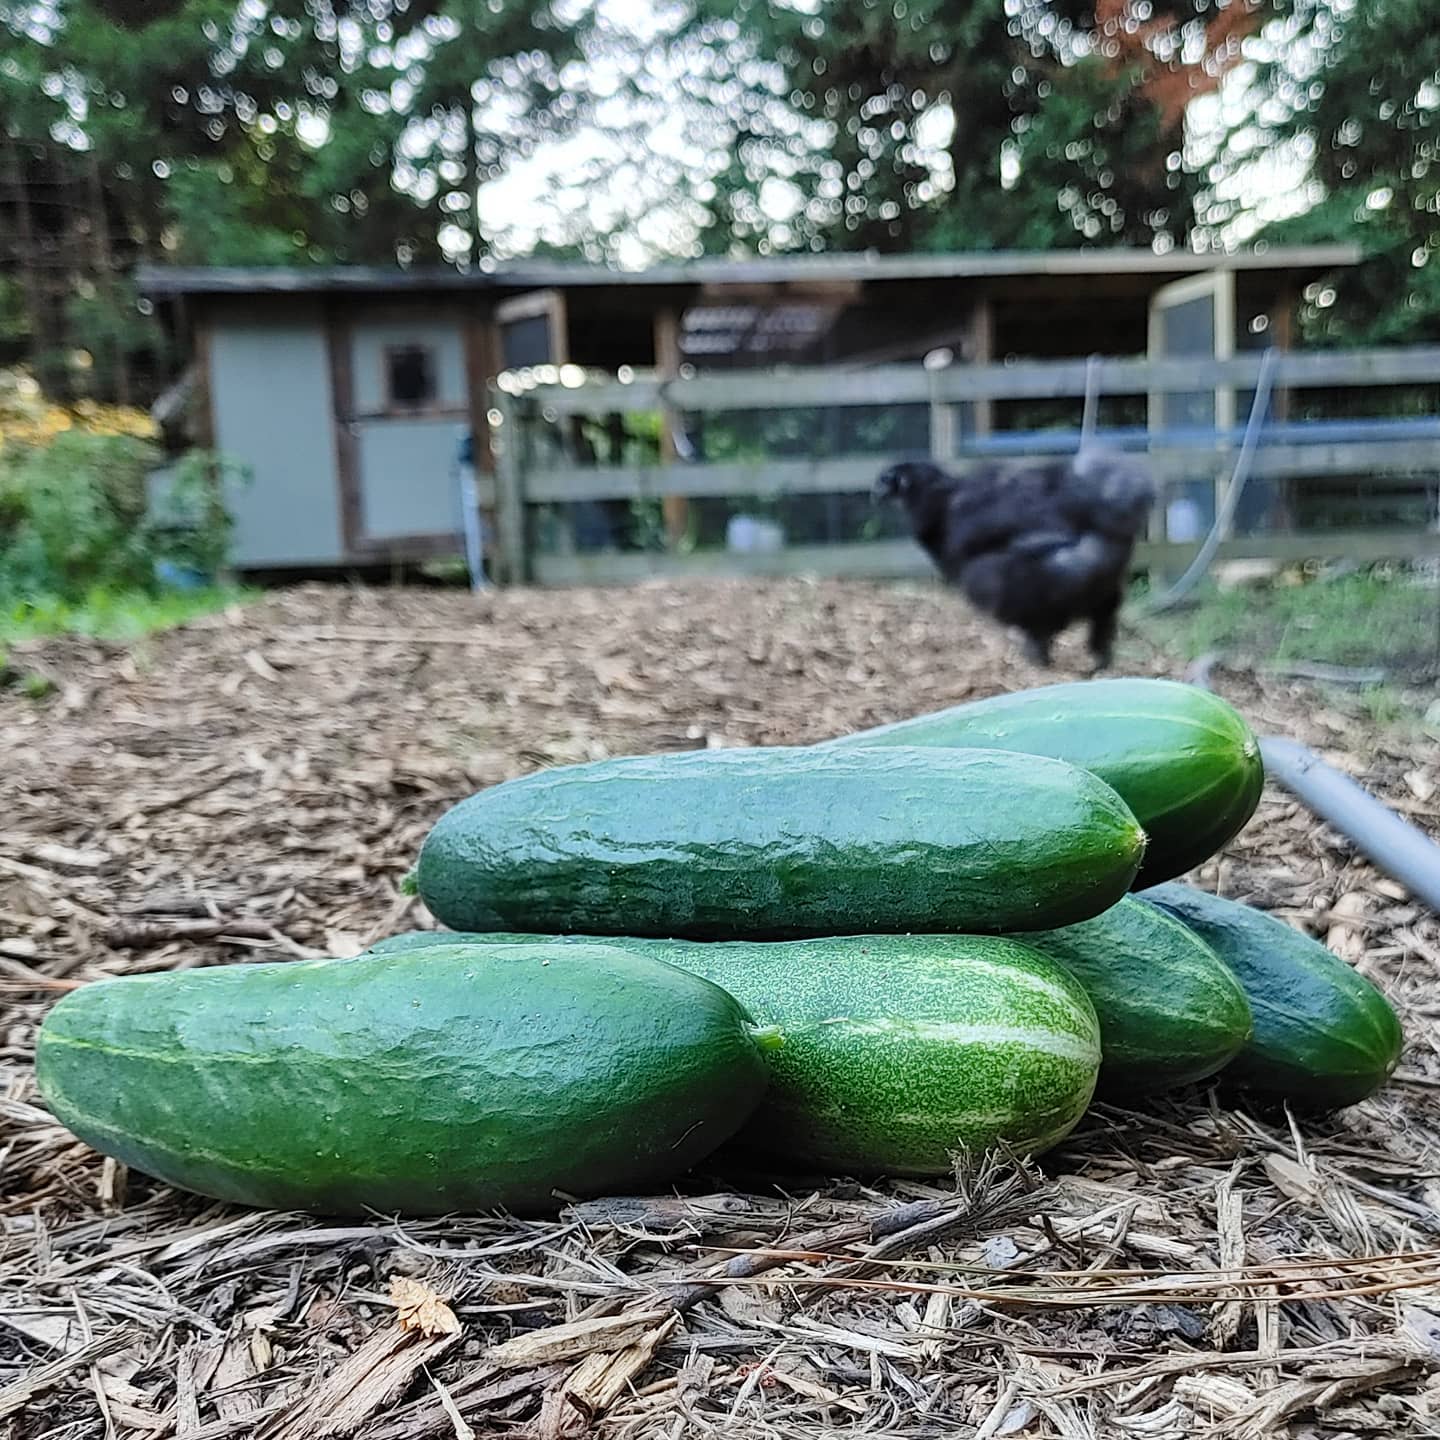 I battled several voracious velociraptors to harvest these cucumbers! (Smallest, but mighty, raptor pictured.)